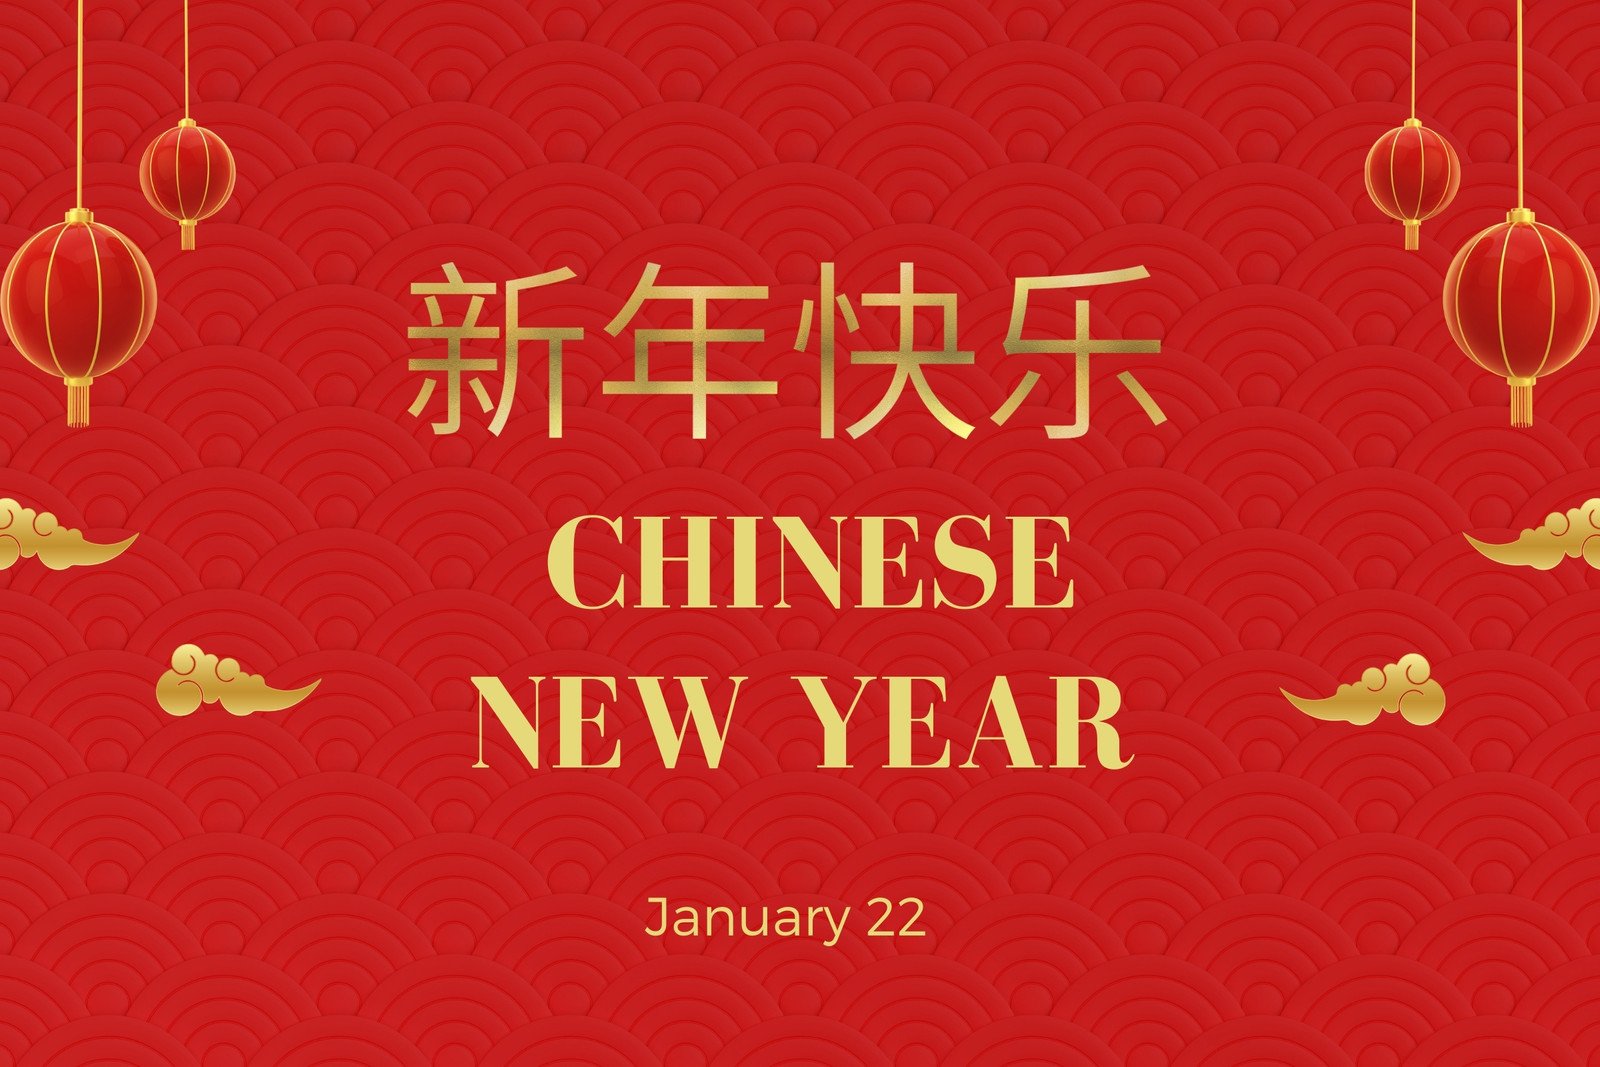 Chinese New Year Greetings/Wishes 2023 for Clients/Friends/Family